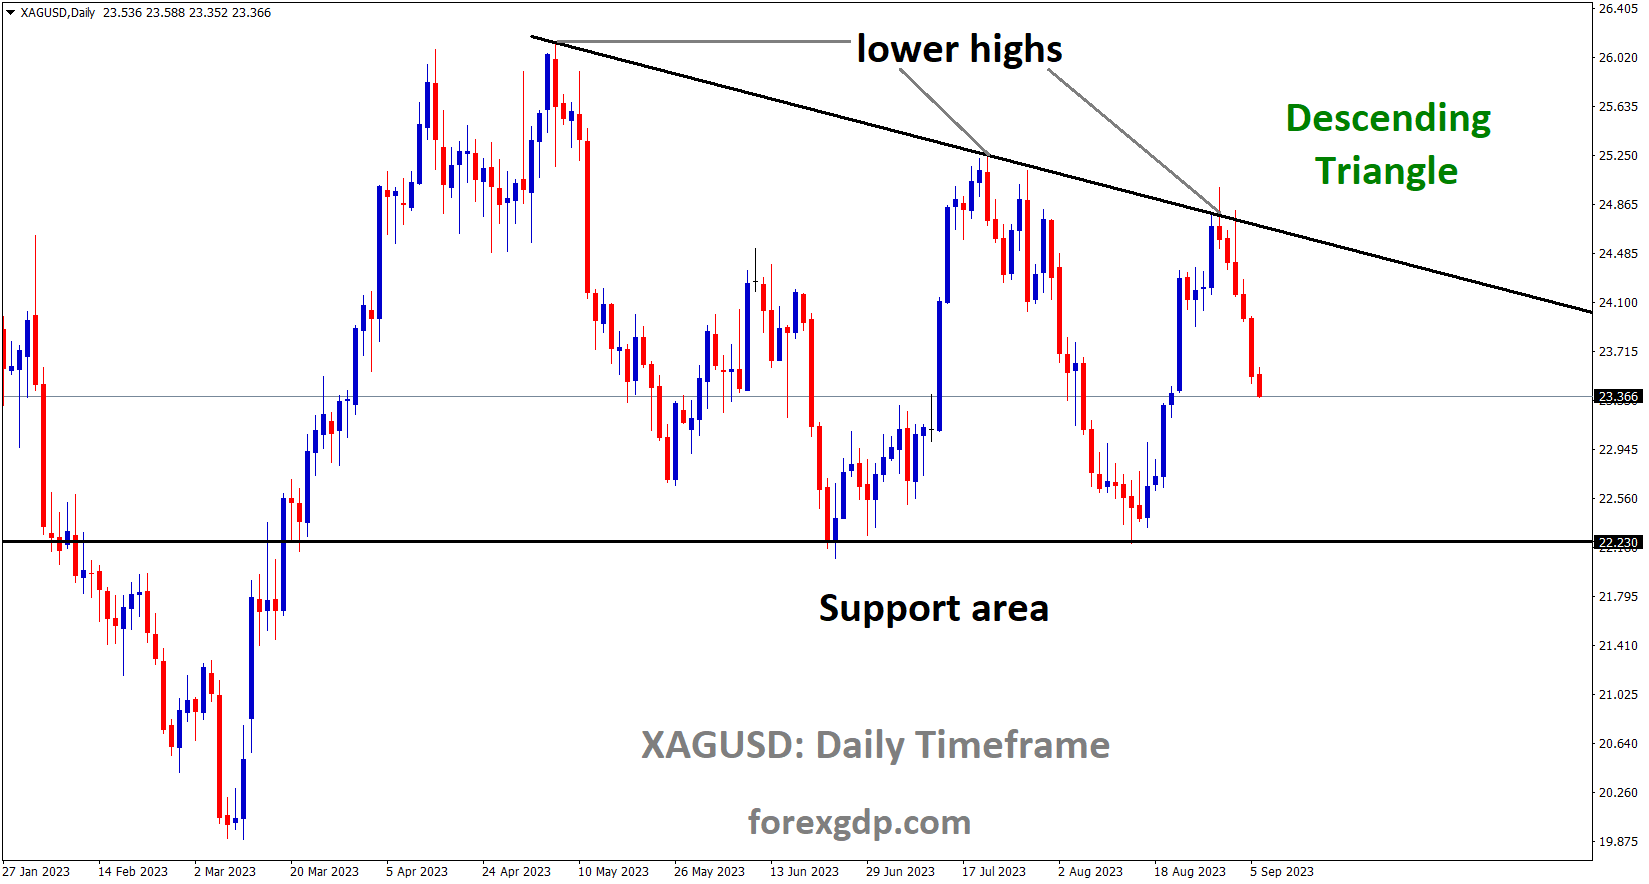 XAGUSD Silver price is moving in the Descending triangle pattern and the market has fallen from the lower high area of the pattern